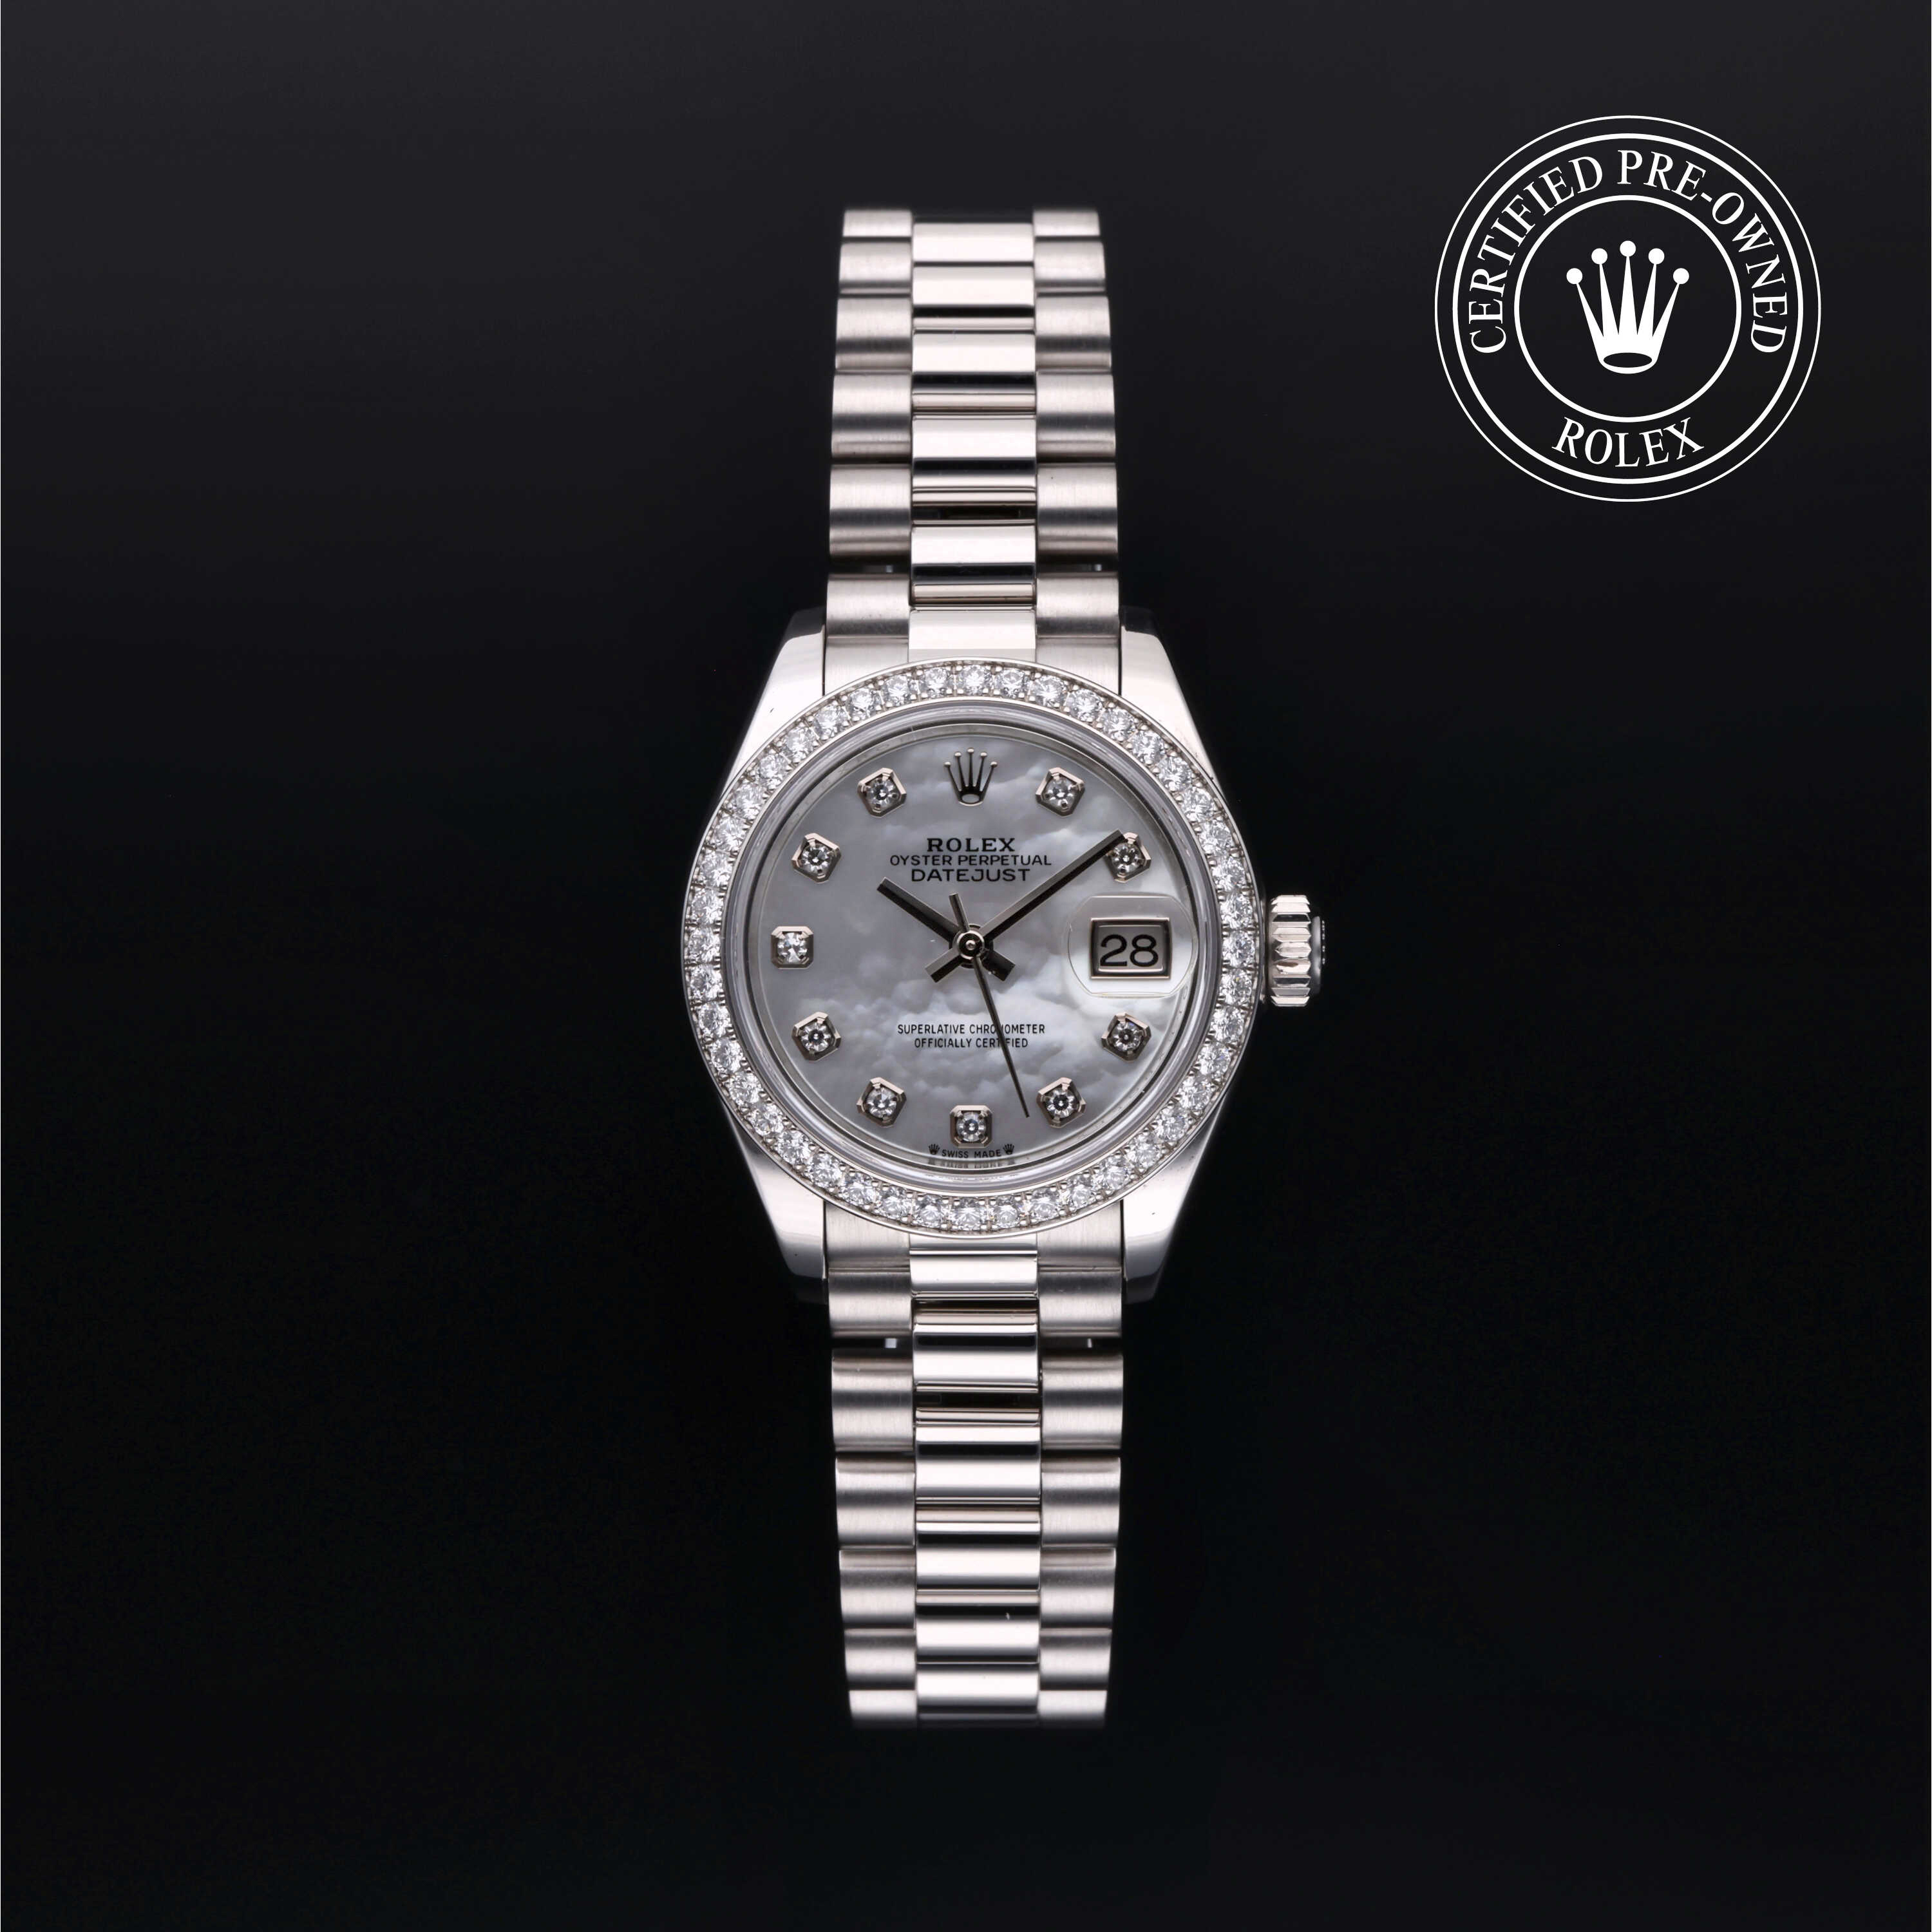 Rolex ® Lady-Datejust Official Certified Pre-Owned